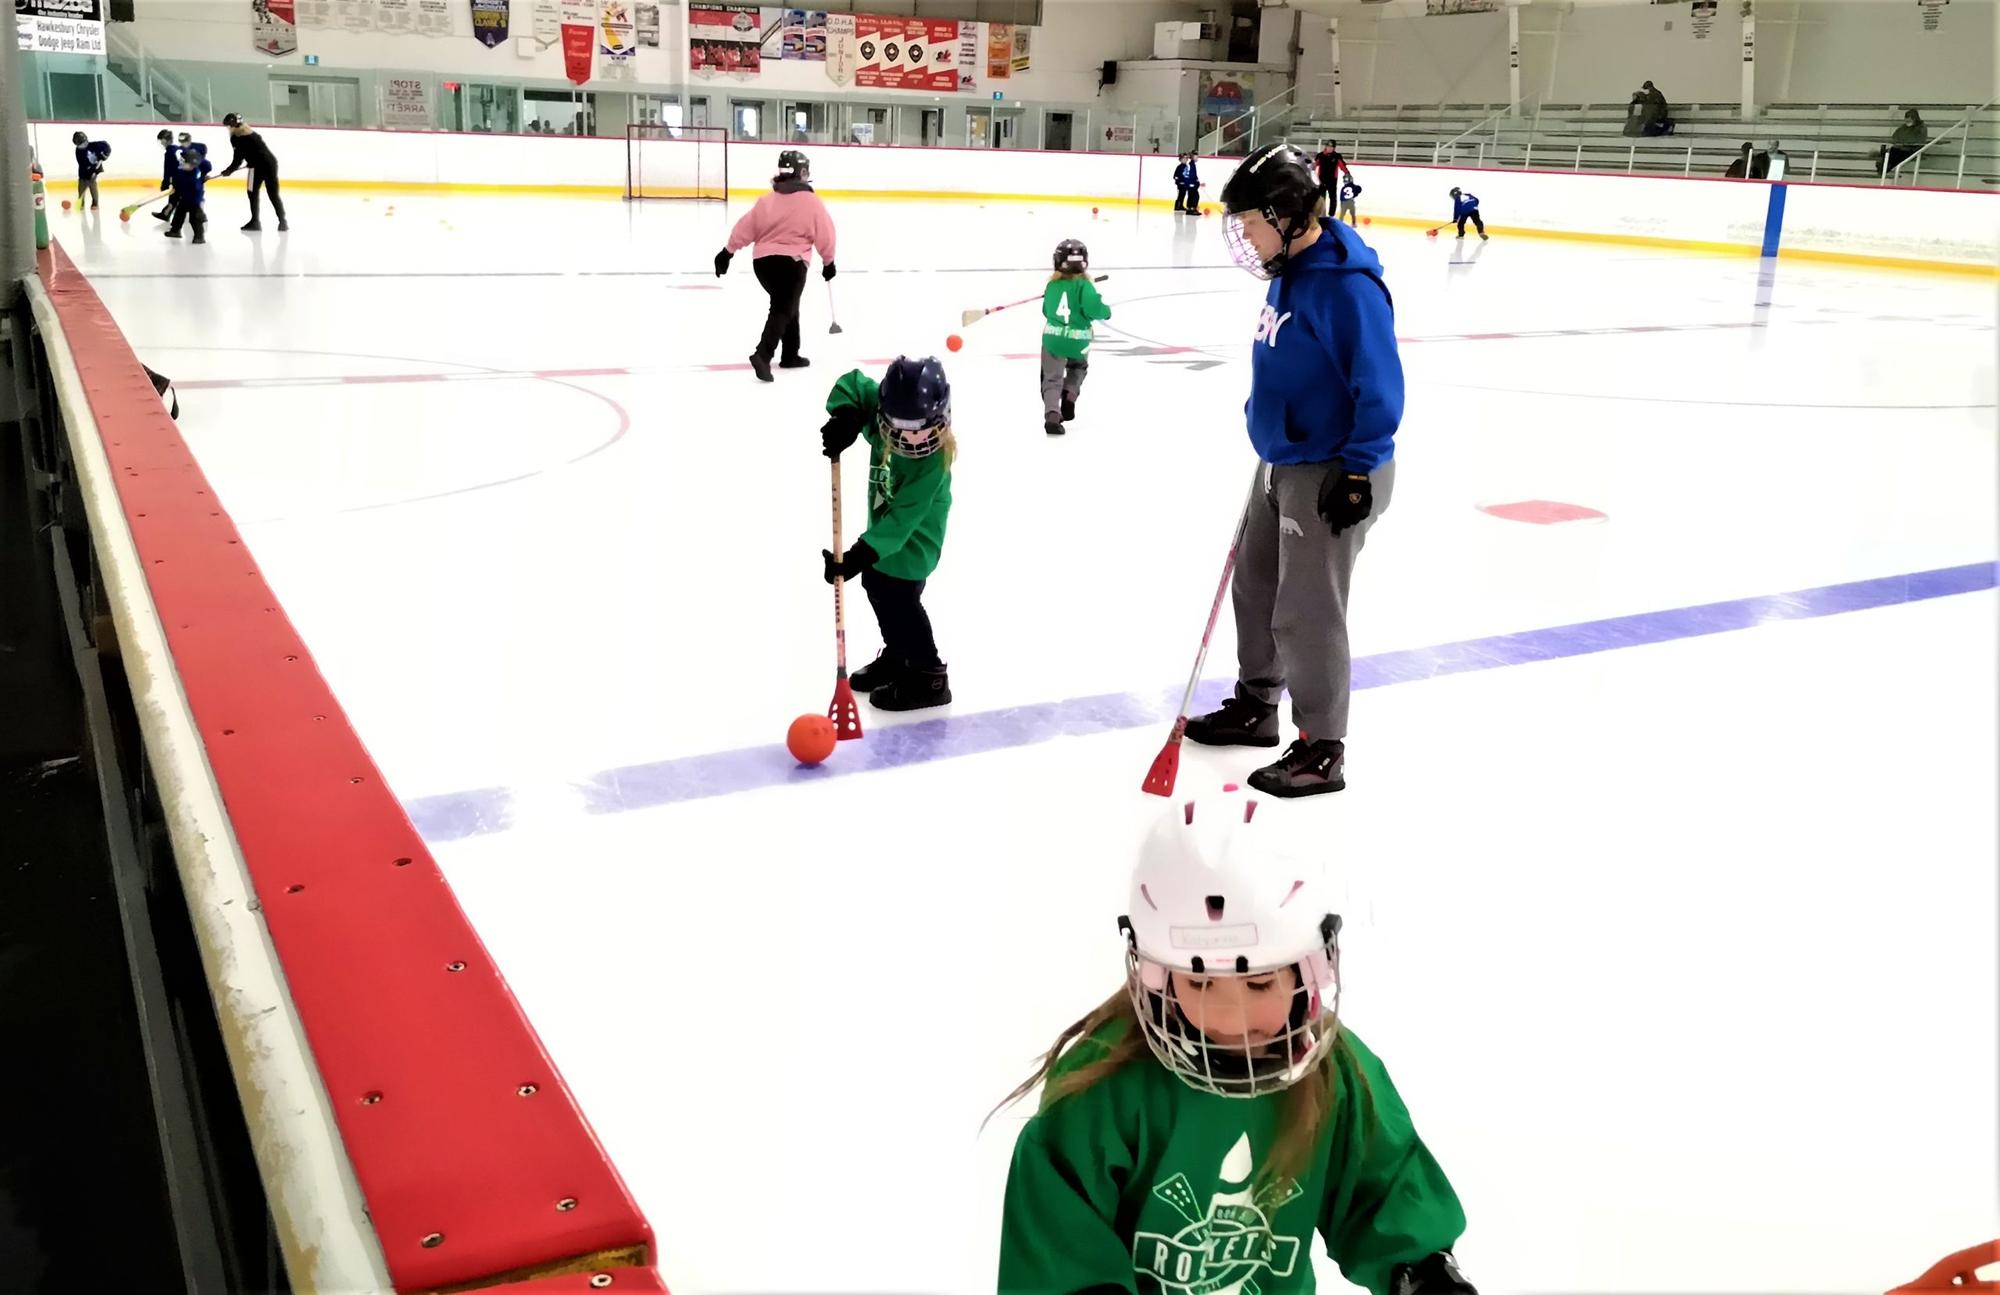 Rockets Youth Broomball takes flight with record number of players